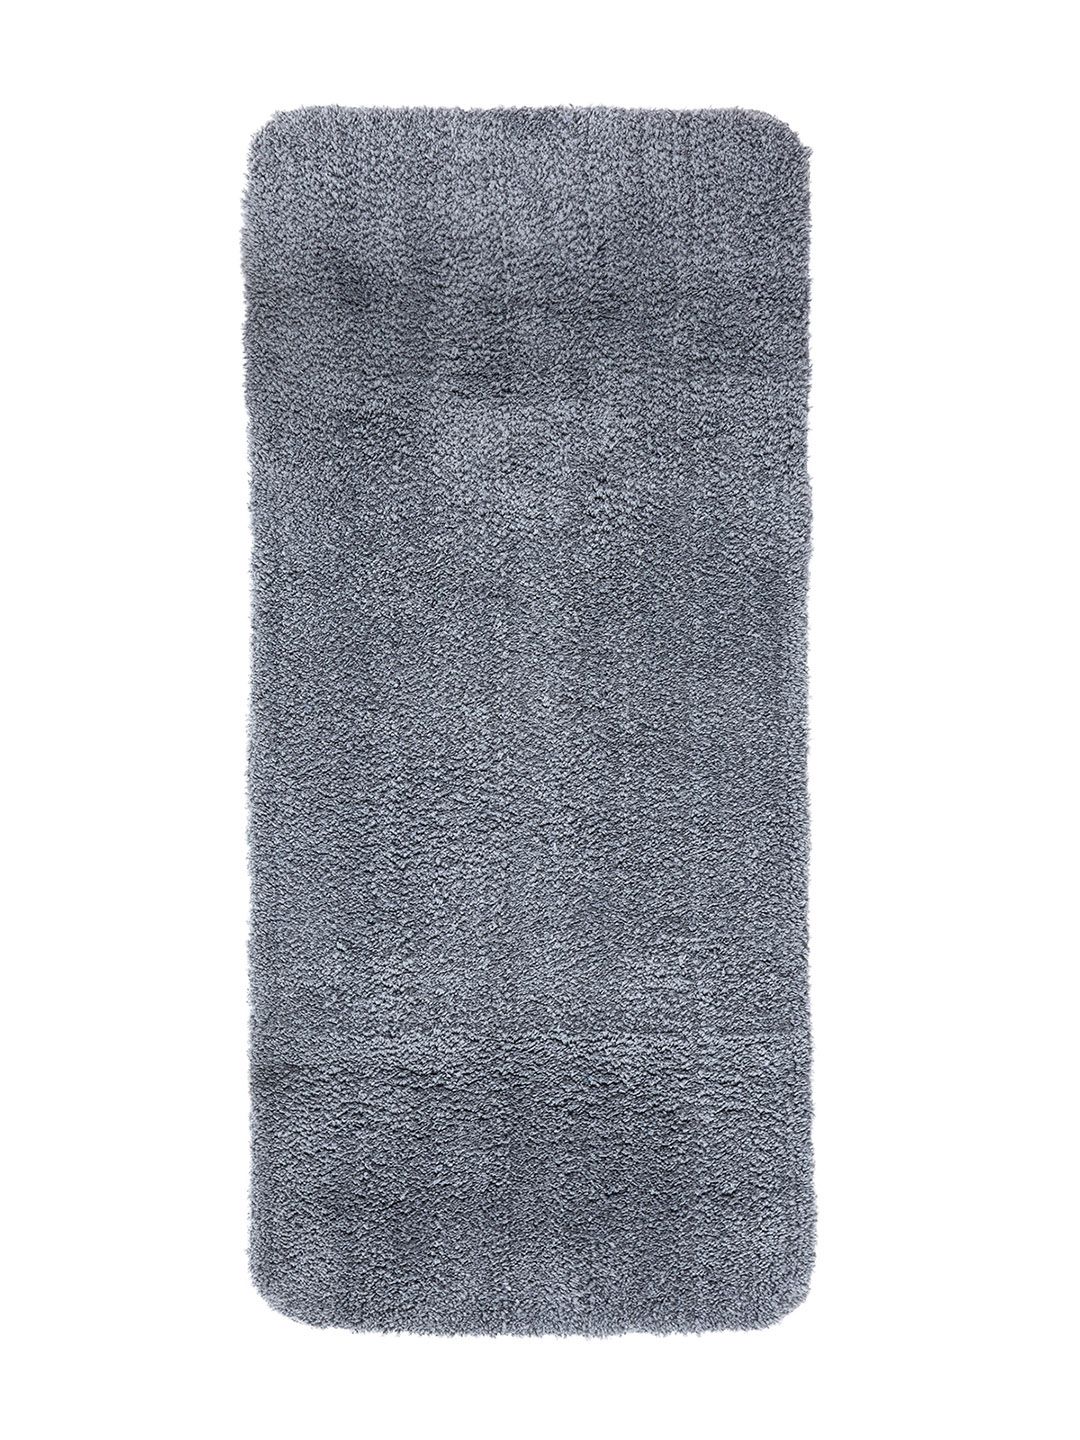 OBSESSIONS Grey Solid Rectangular Bath Rug Price in India